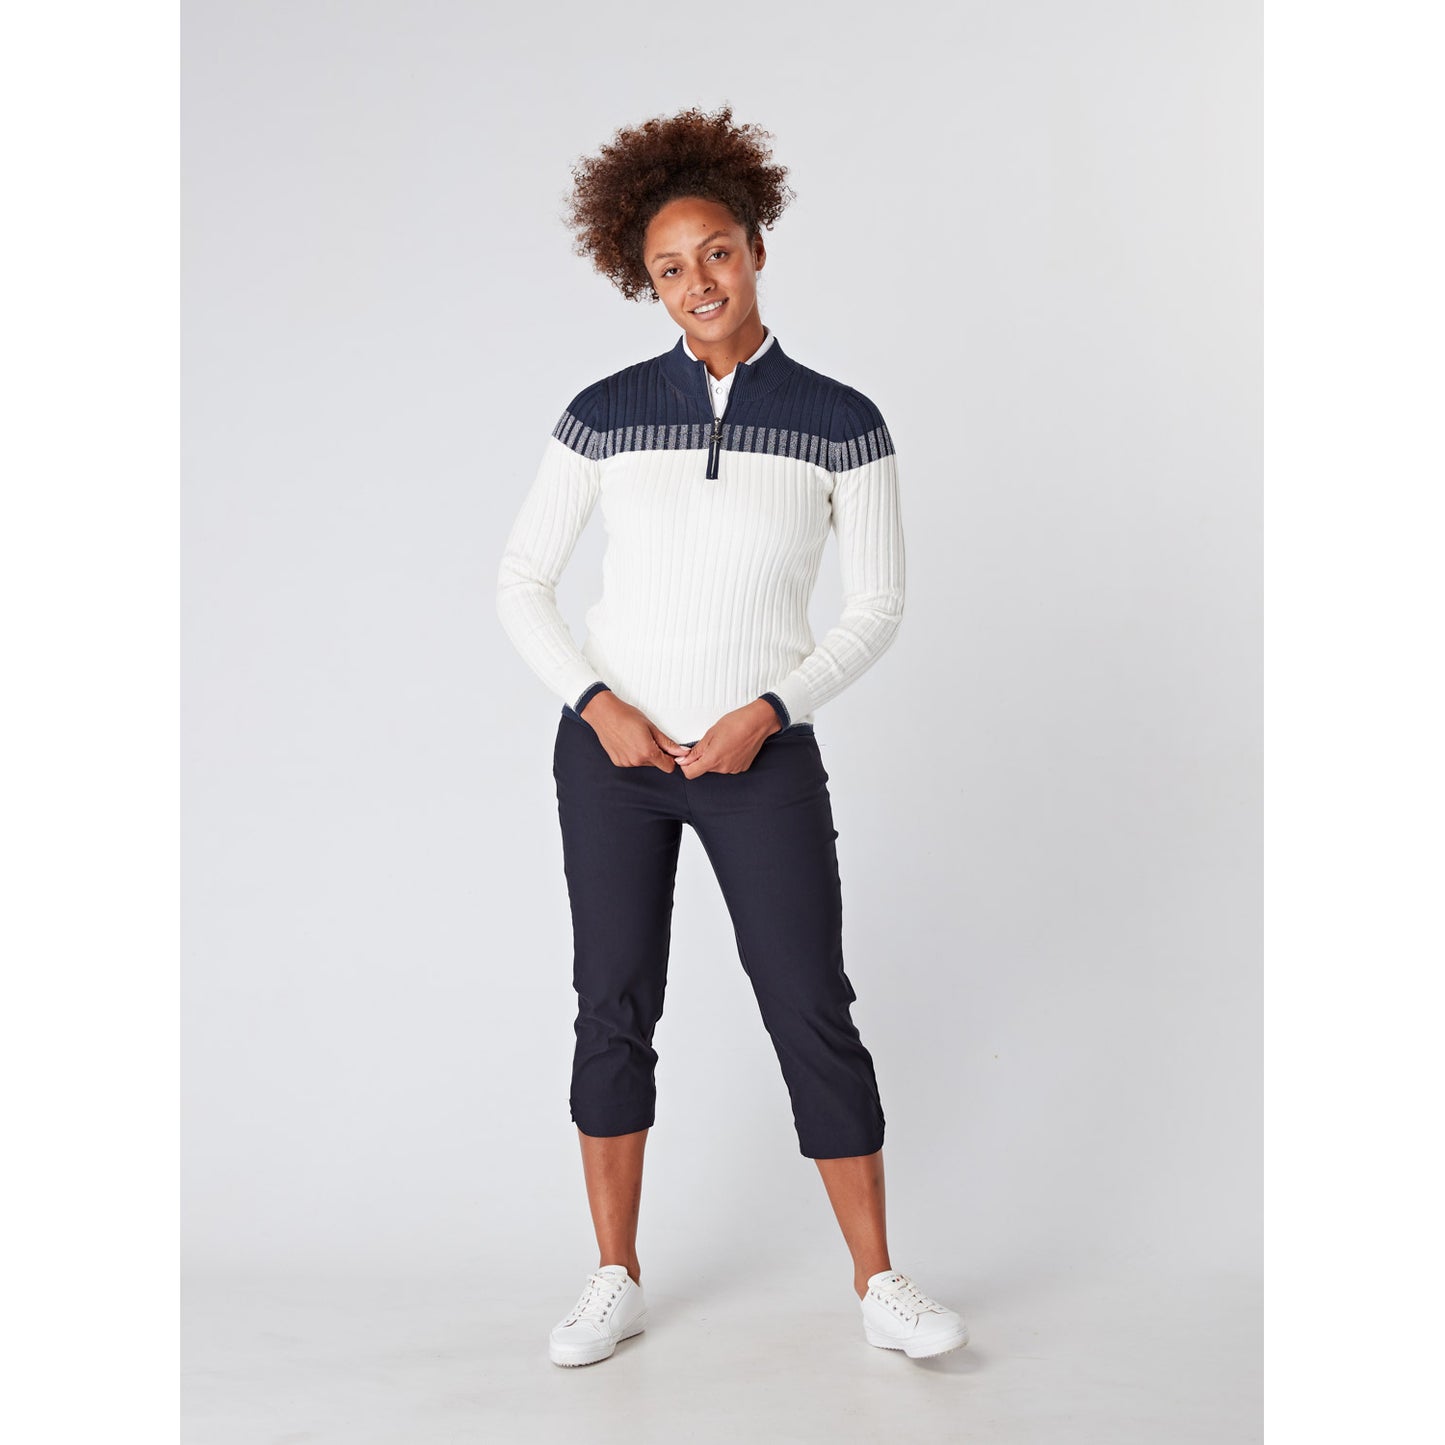 Swing Out Sister Ladies Colour Block Zip-Neck Sweater